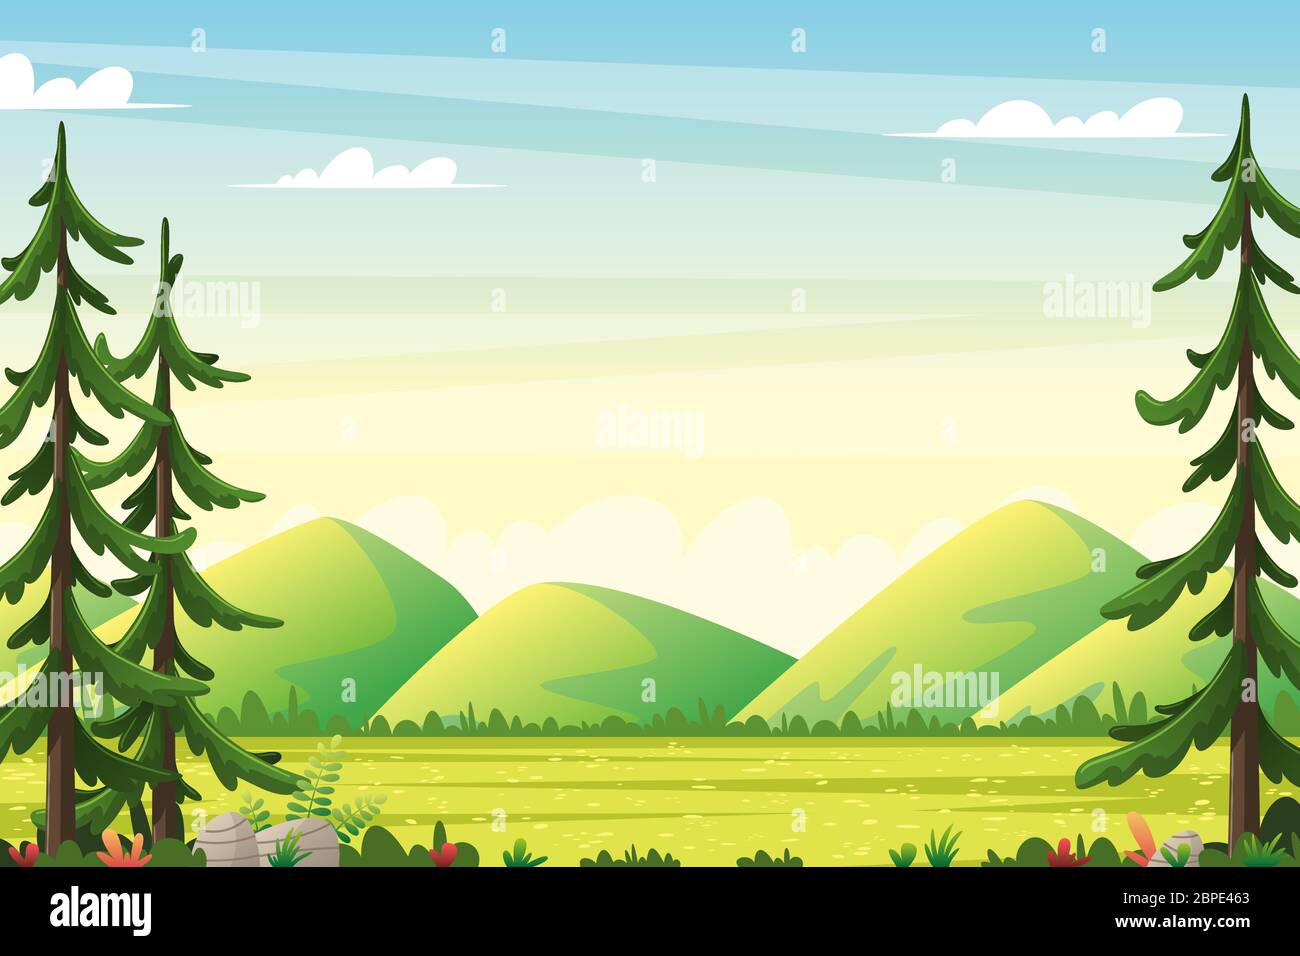 Rural summer landscape with moutains. Vector illustration with separate layers. Stock Vector